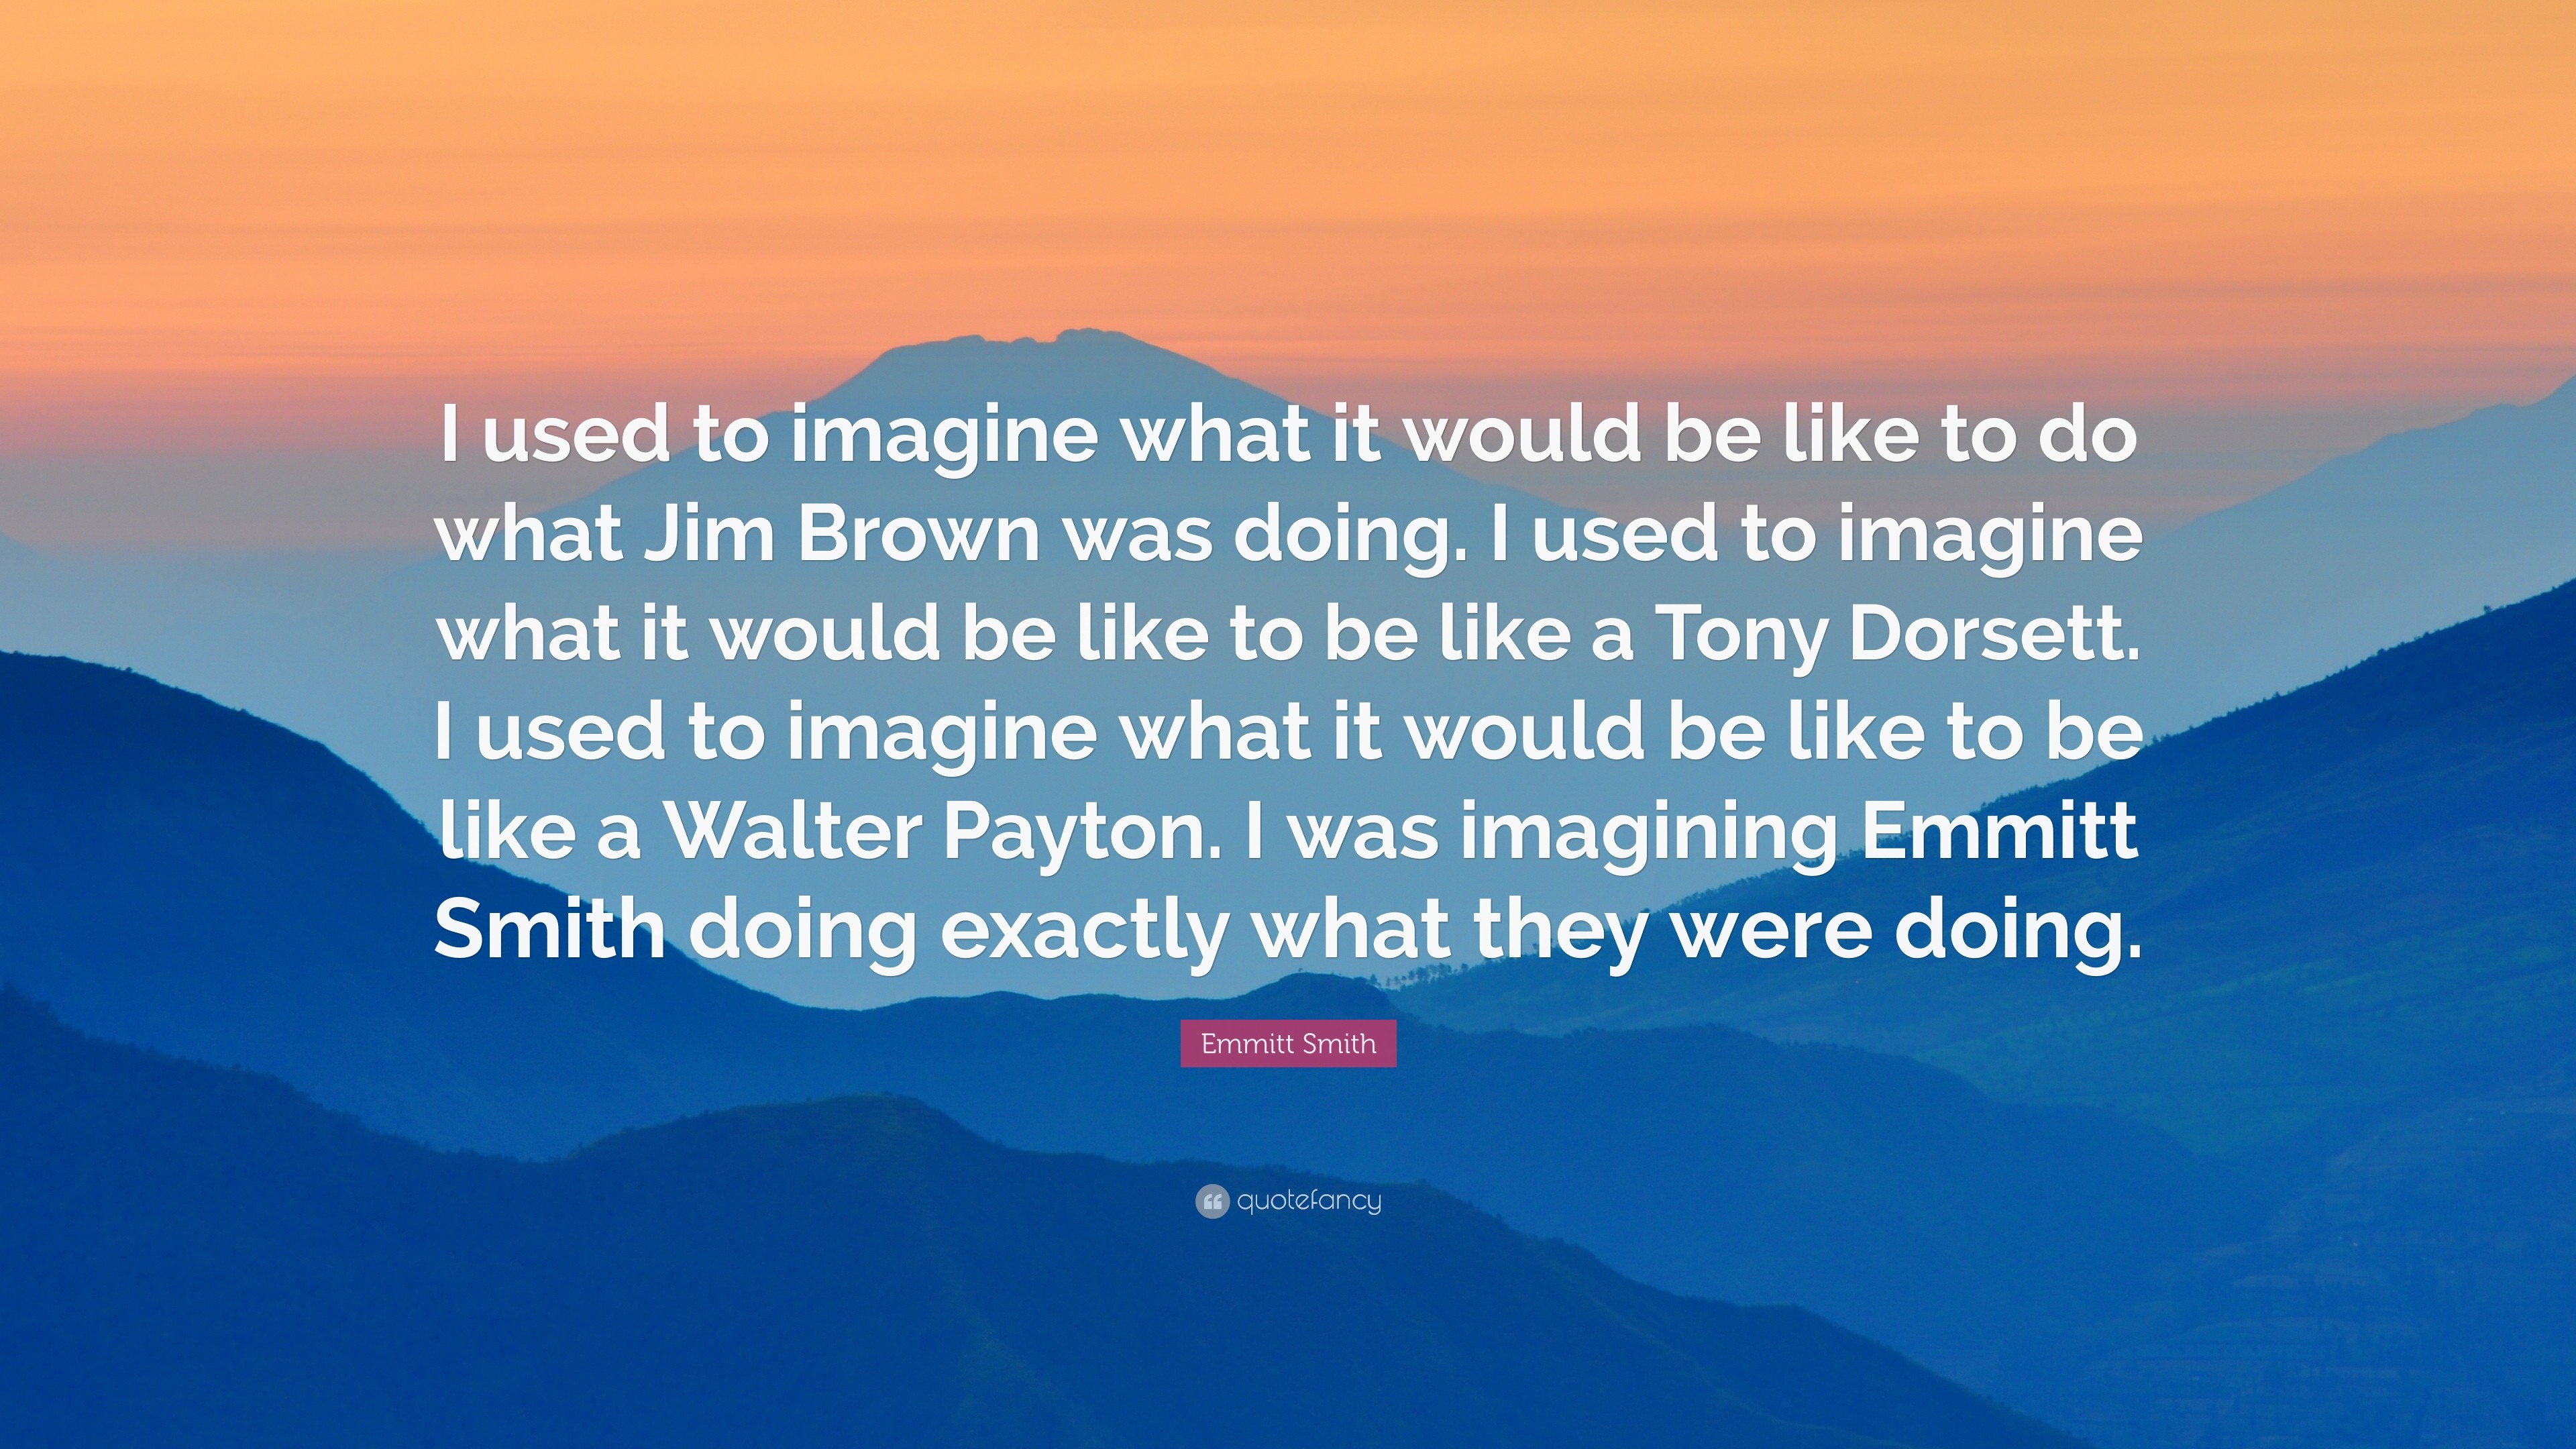 3840x2160 Emmitt Smith Quote: “I used to imagine what it would be like to do